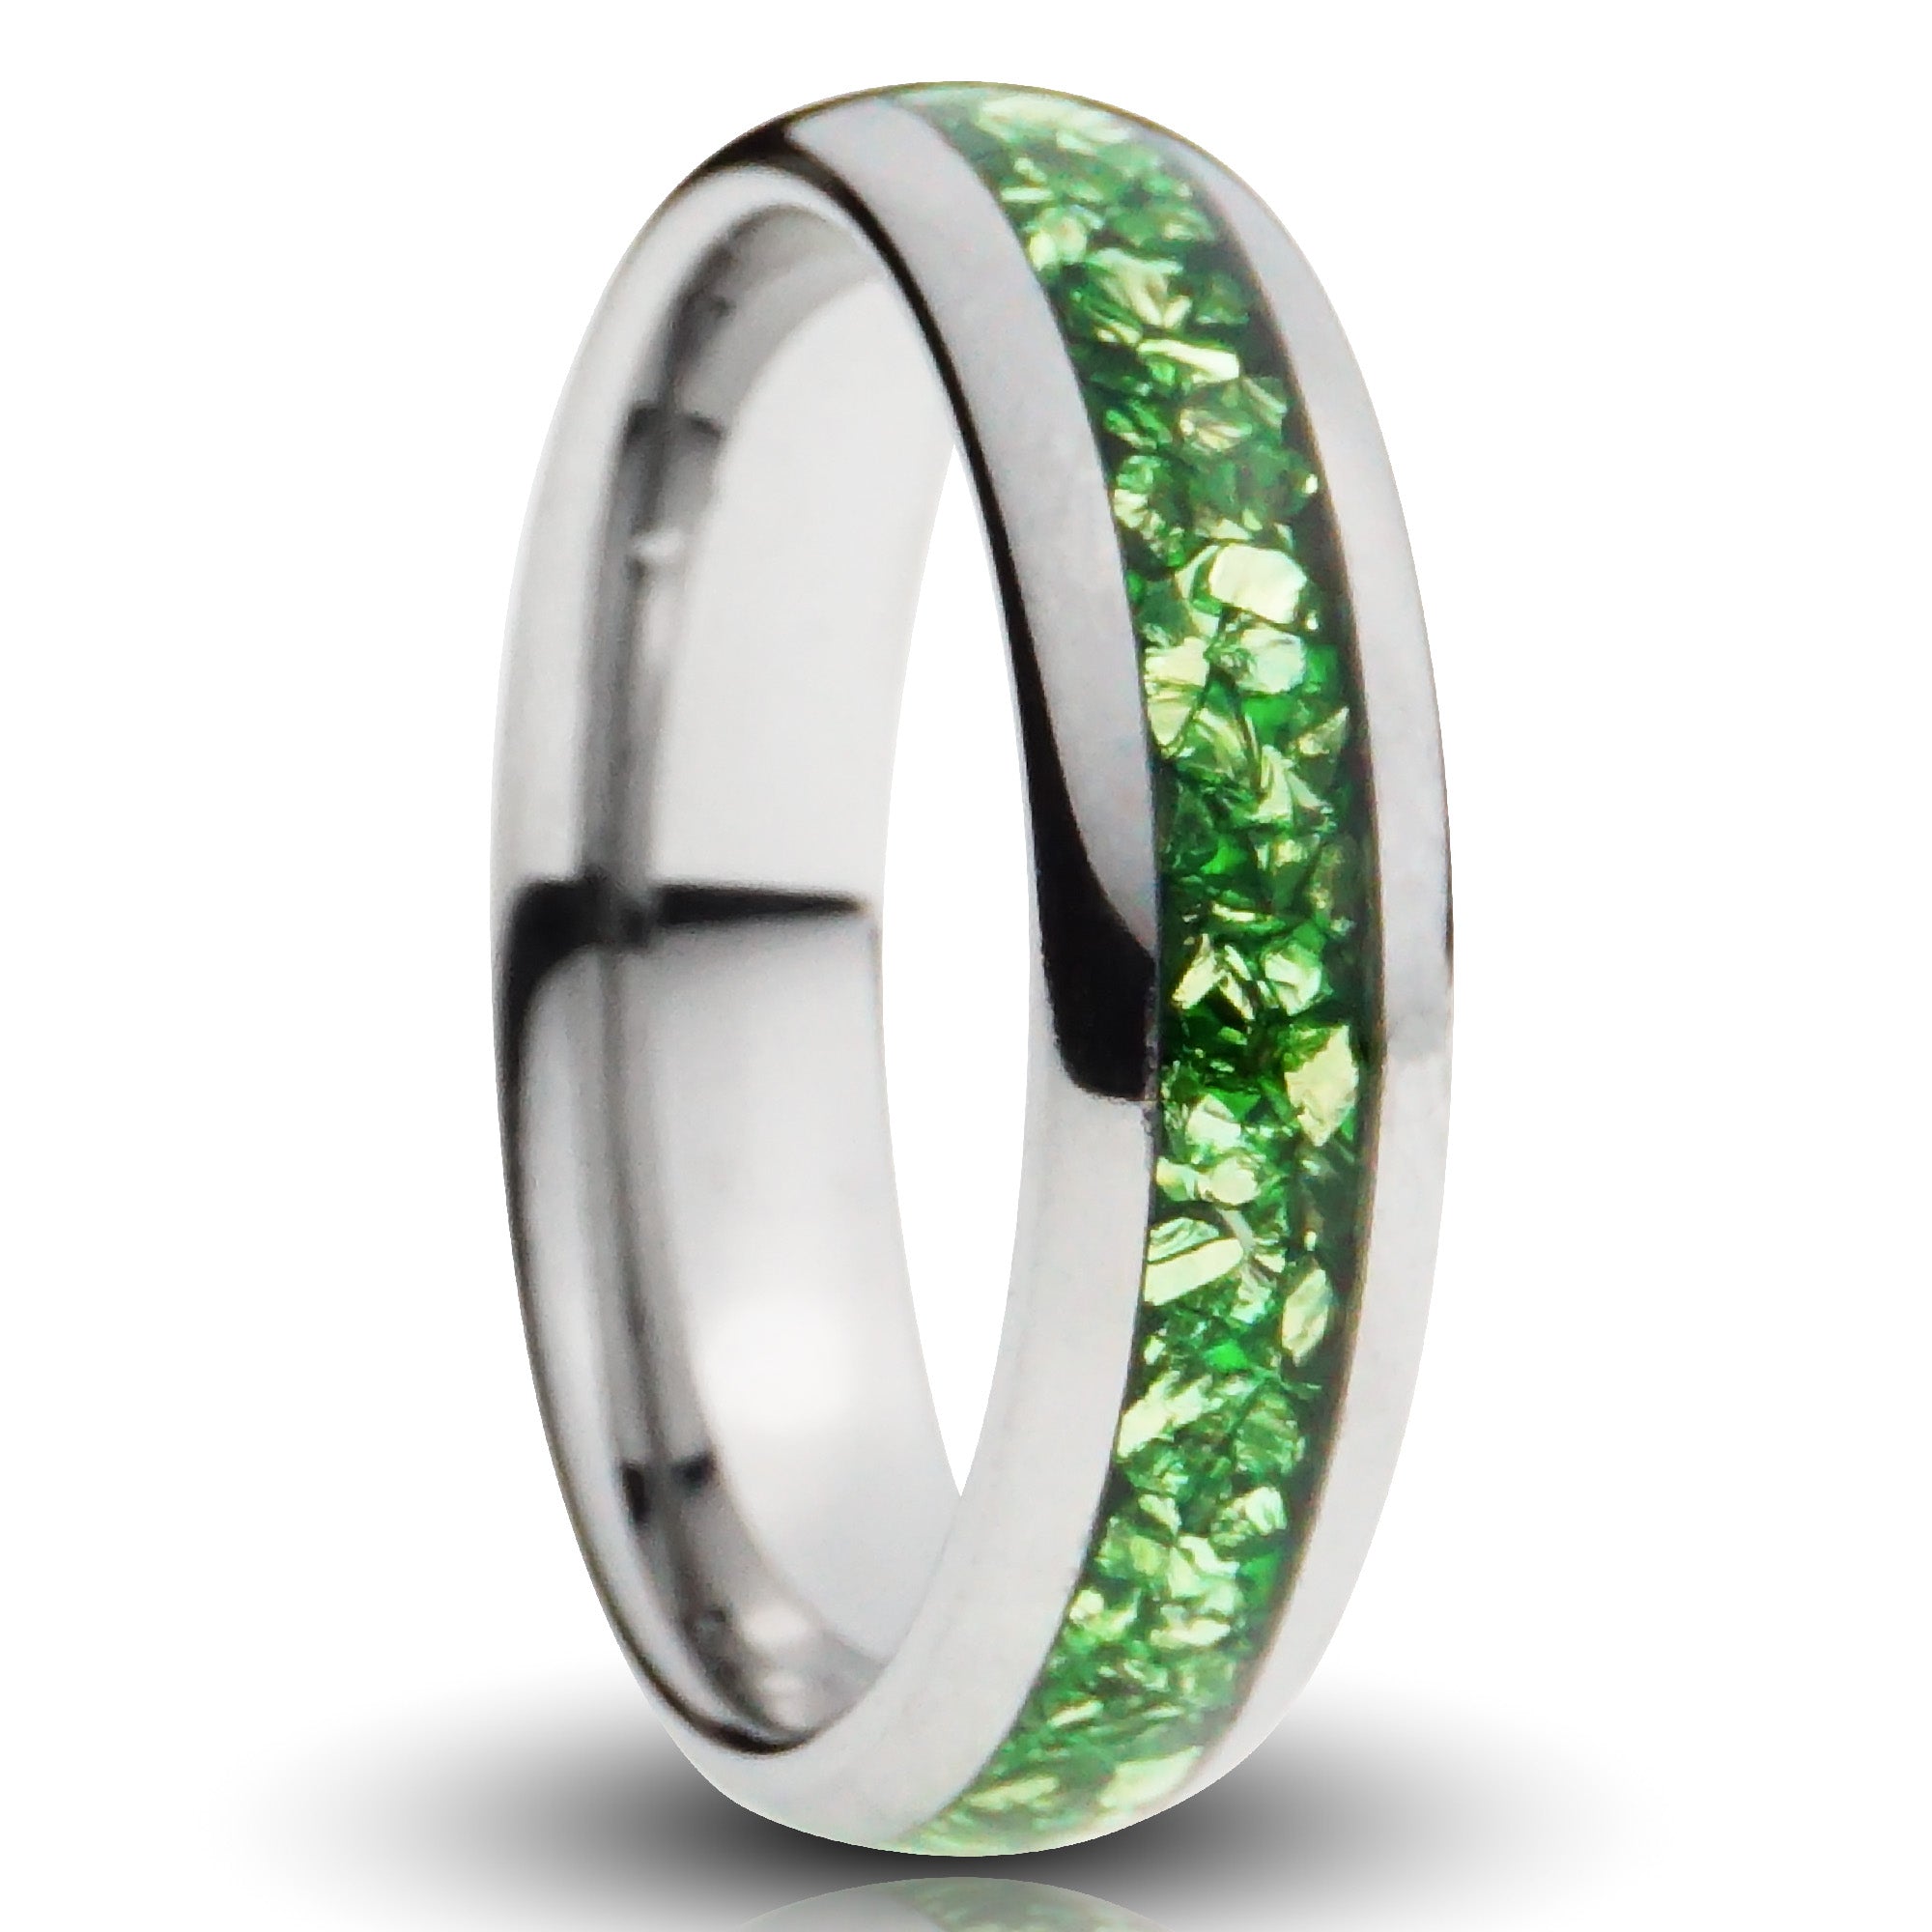 Sterling Silver Organic Edge Alternative Engagement Ring With Green  Tourmaline – Brent&Jess Fingerprint jewelry- made with your fingerprints